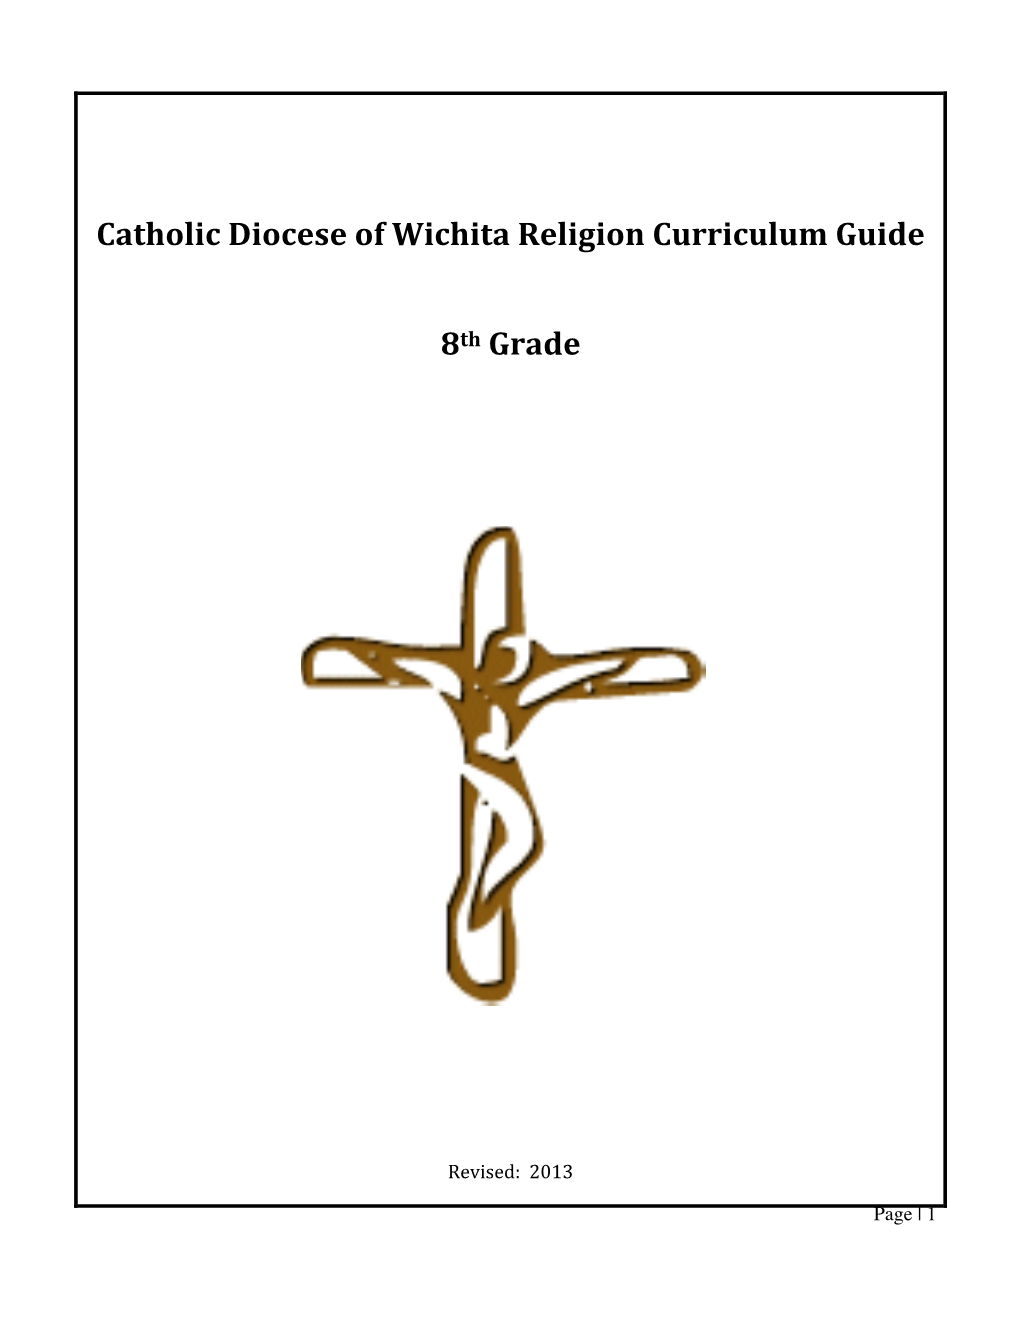 Catholic Diocese of Wichita Religion Curriculum Guide 8Th Grade